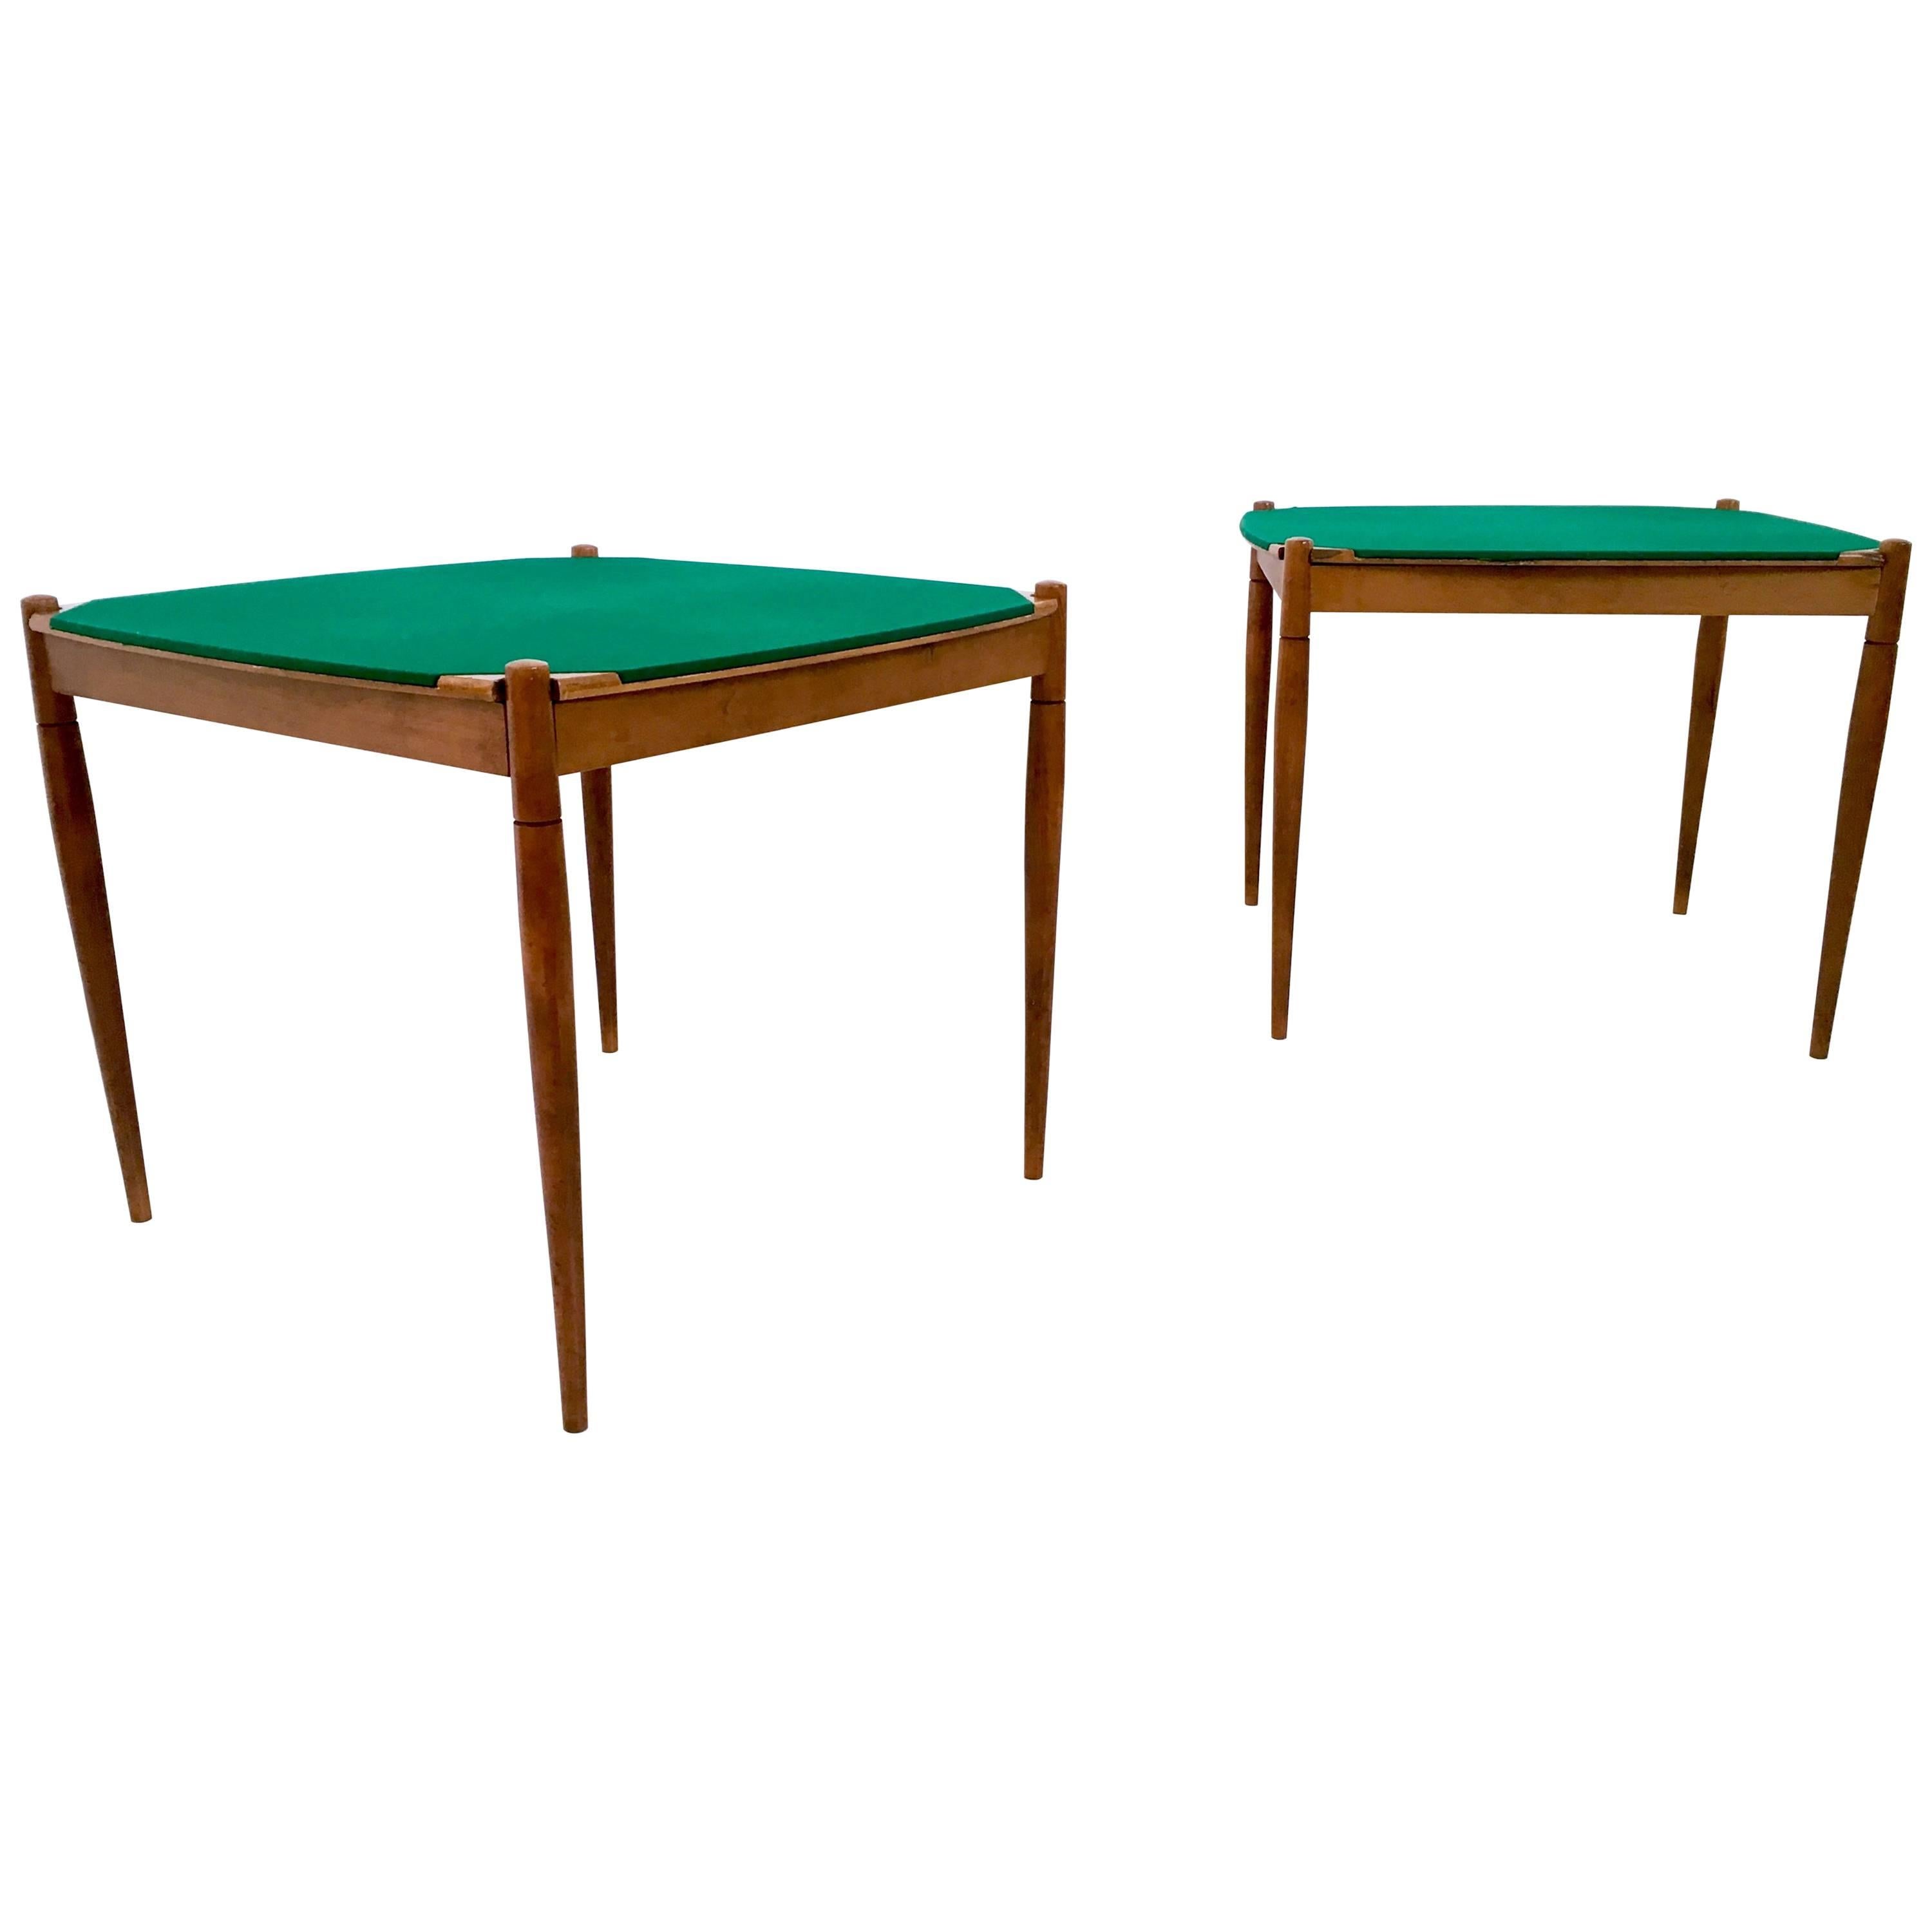 The table is made of beech and has a reversible tabletop in veneered walnut and a green felt top with storage space underneath.
In good original condition.